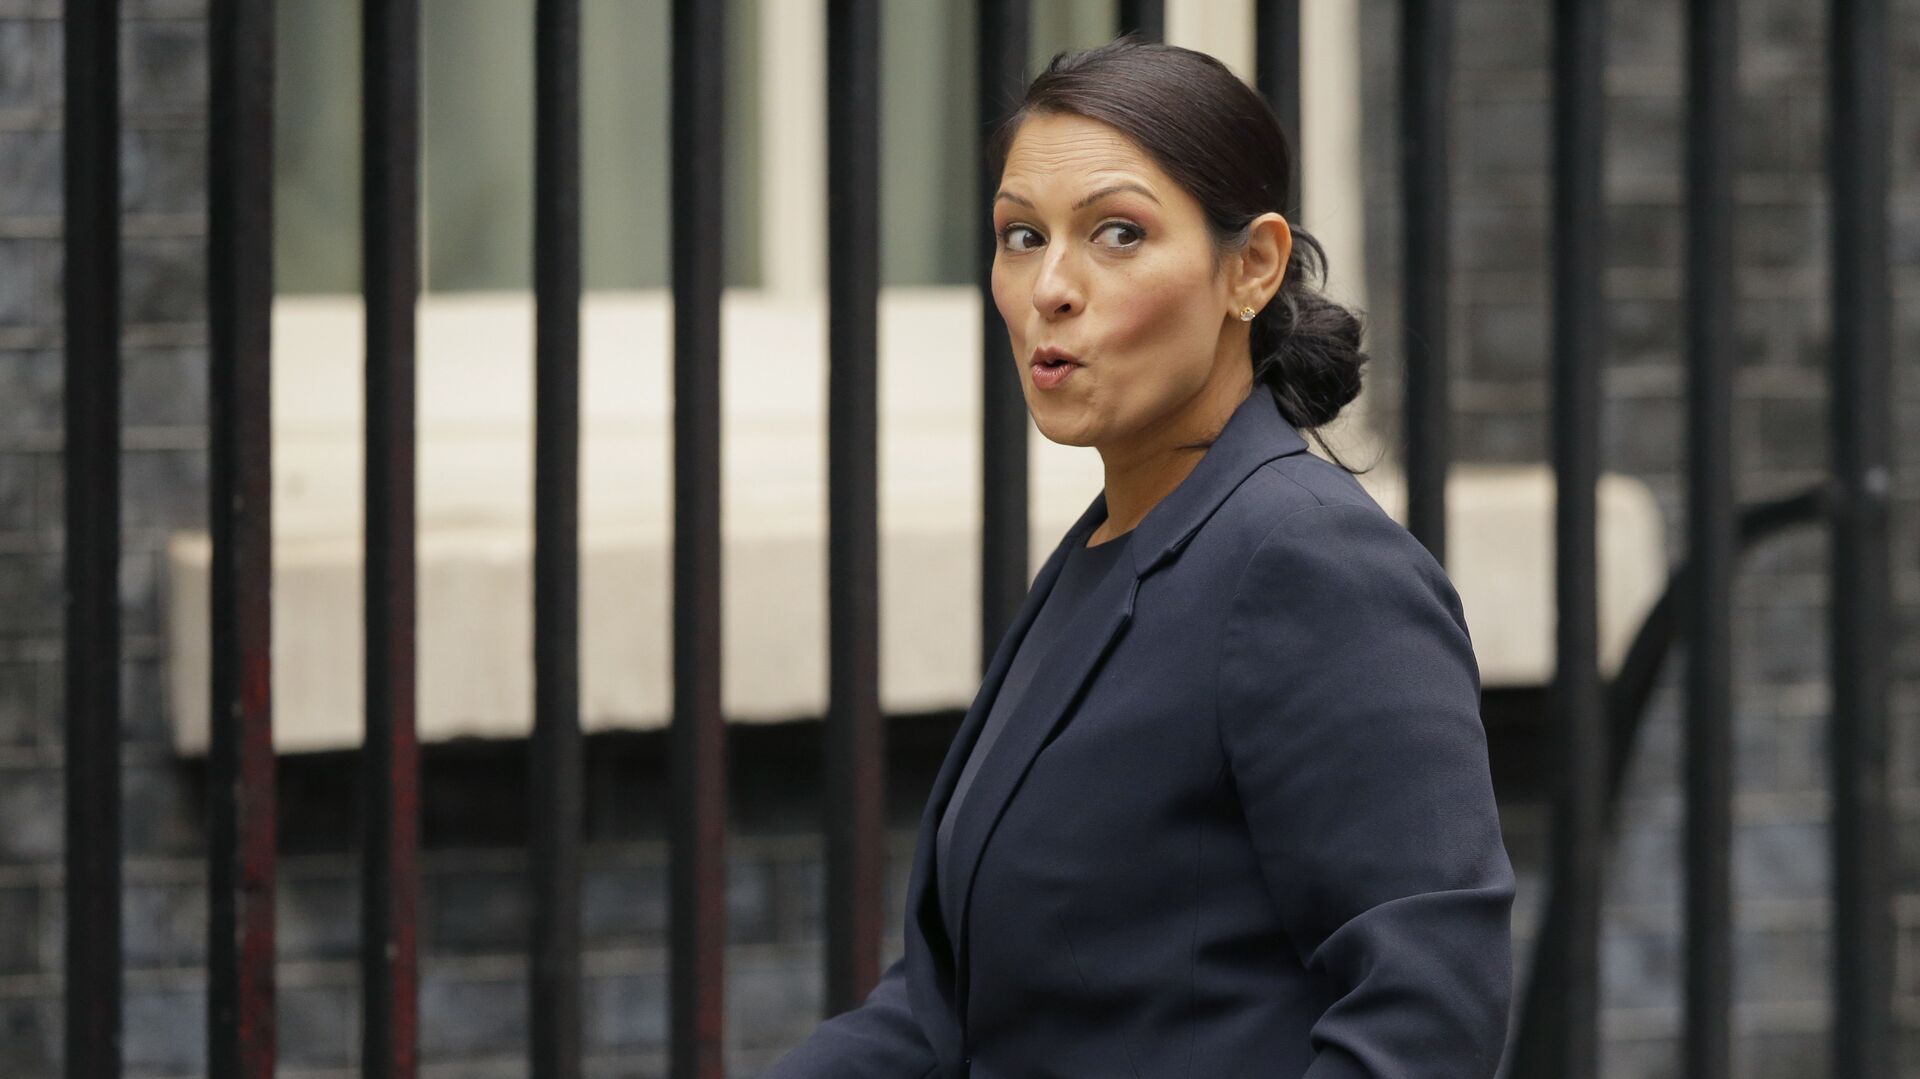 Britain's Secretary of State for International Development Priti Patel reacts to a question from the media as she arrives for a cabinet meeting at 10 Downing Street in London, Tuesday, Oct. 10, 2017.  - Sputnik International, 1920, 09.09.2021